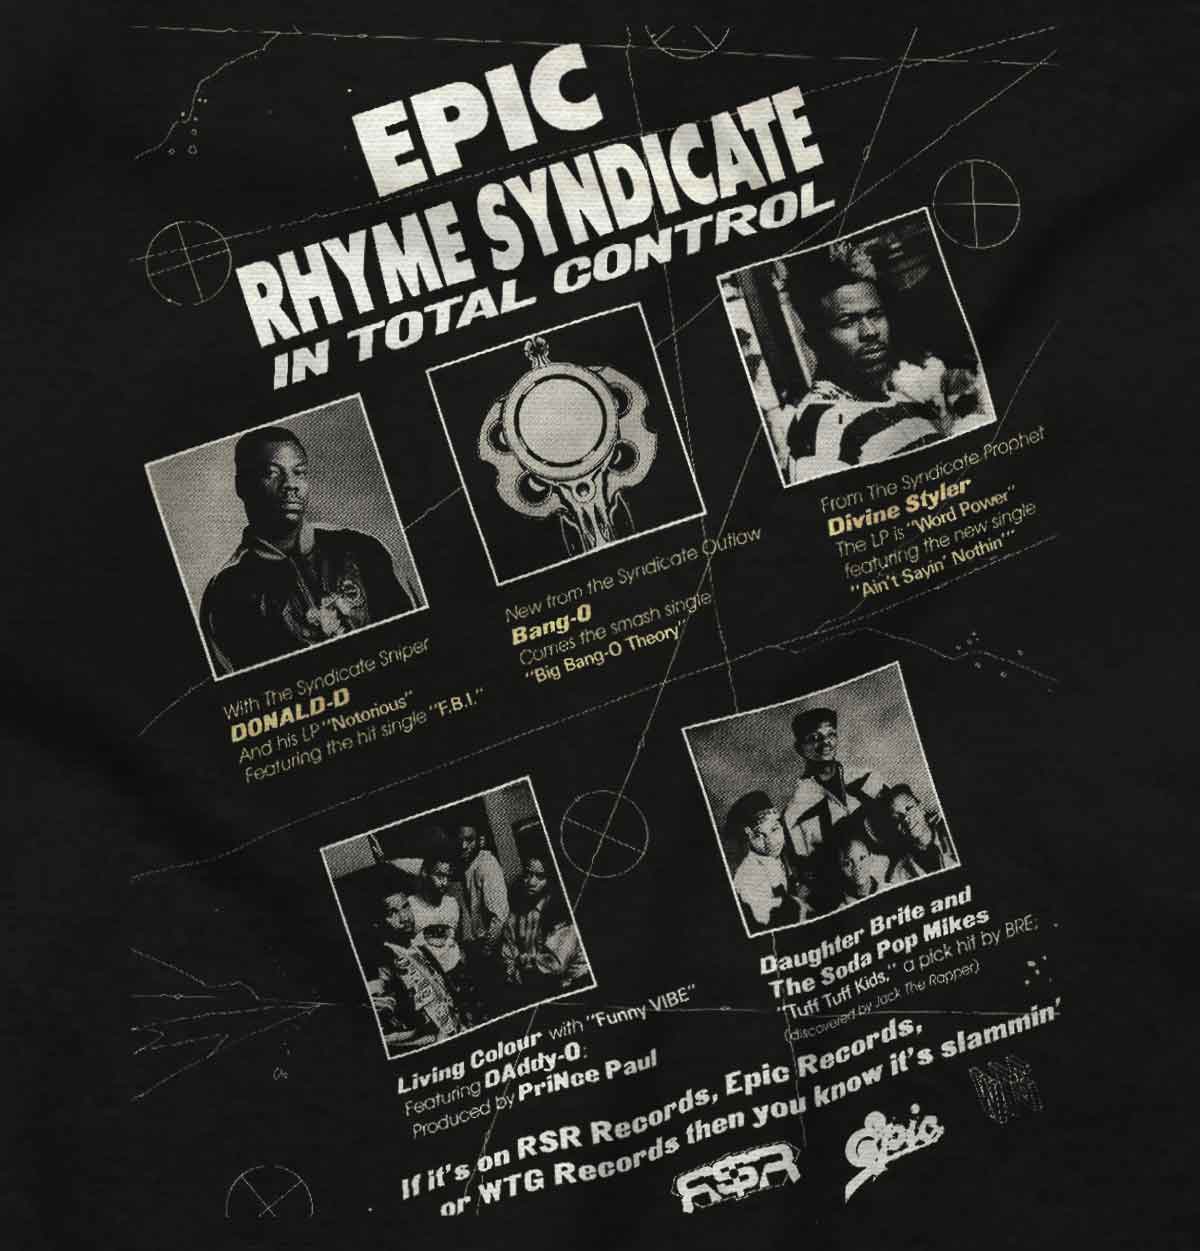 A powerful design that honors the influential "EPIC RHYME SYNDICATE" and its talented members. It showcases pictures of Donald D and his crew, reminding us of their impact on hip-hop culture.